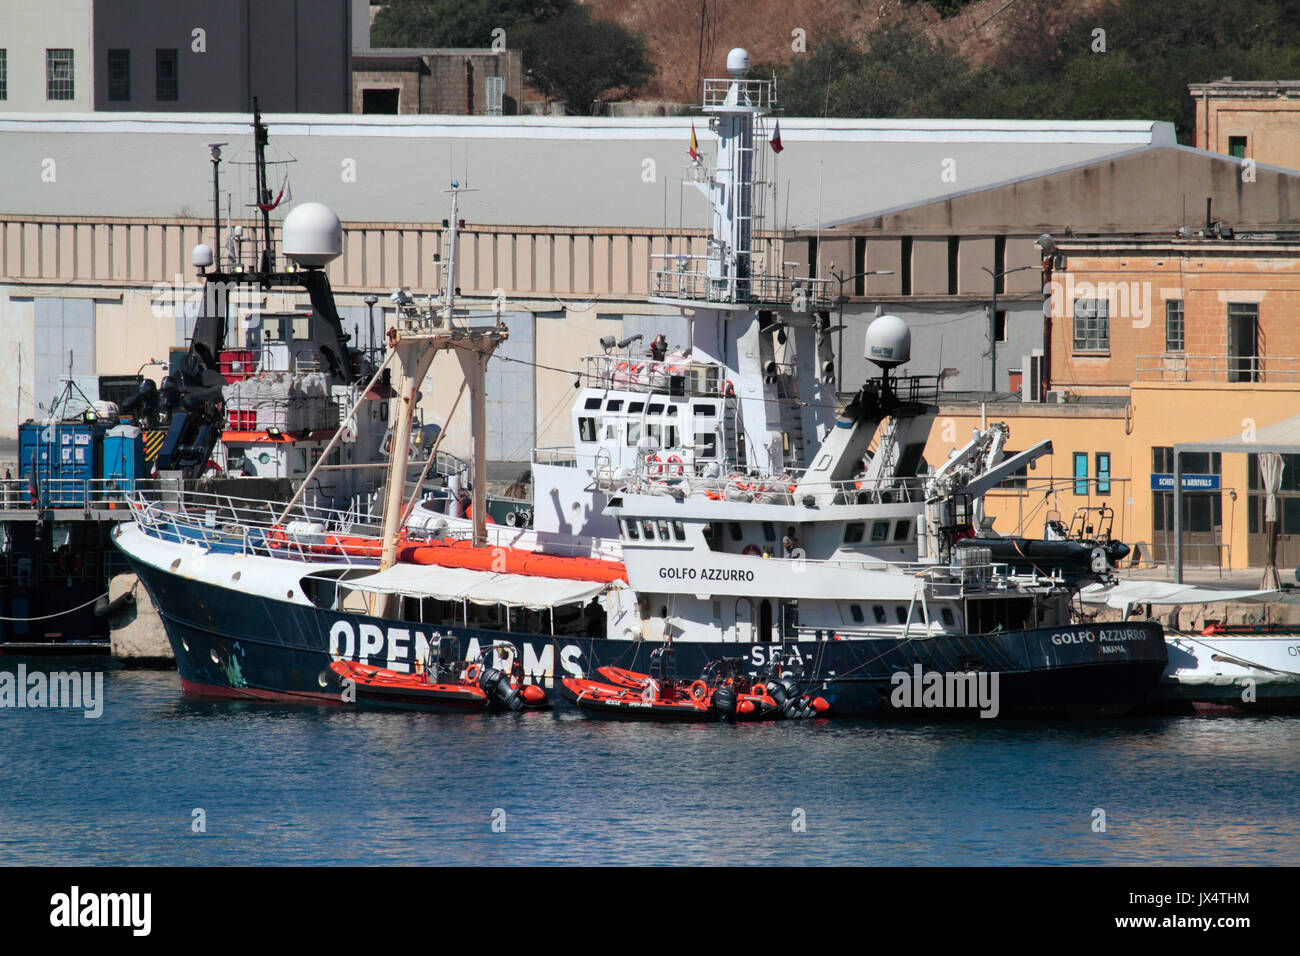 The rescue ship Golfo Azzurro, operated by the NGO Proactiva Open Arms, tied up in Malta's Grand Harbour Stock Photo